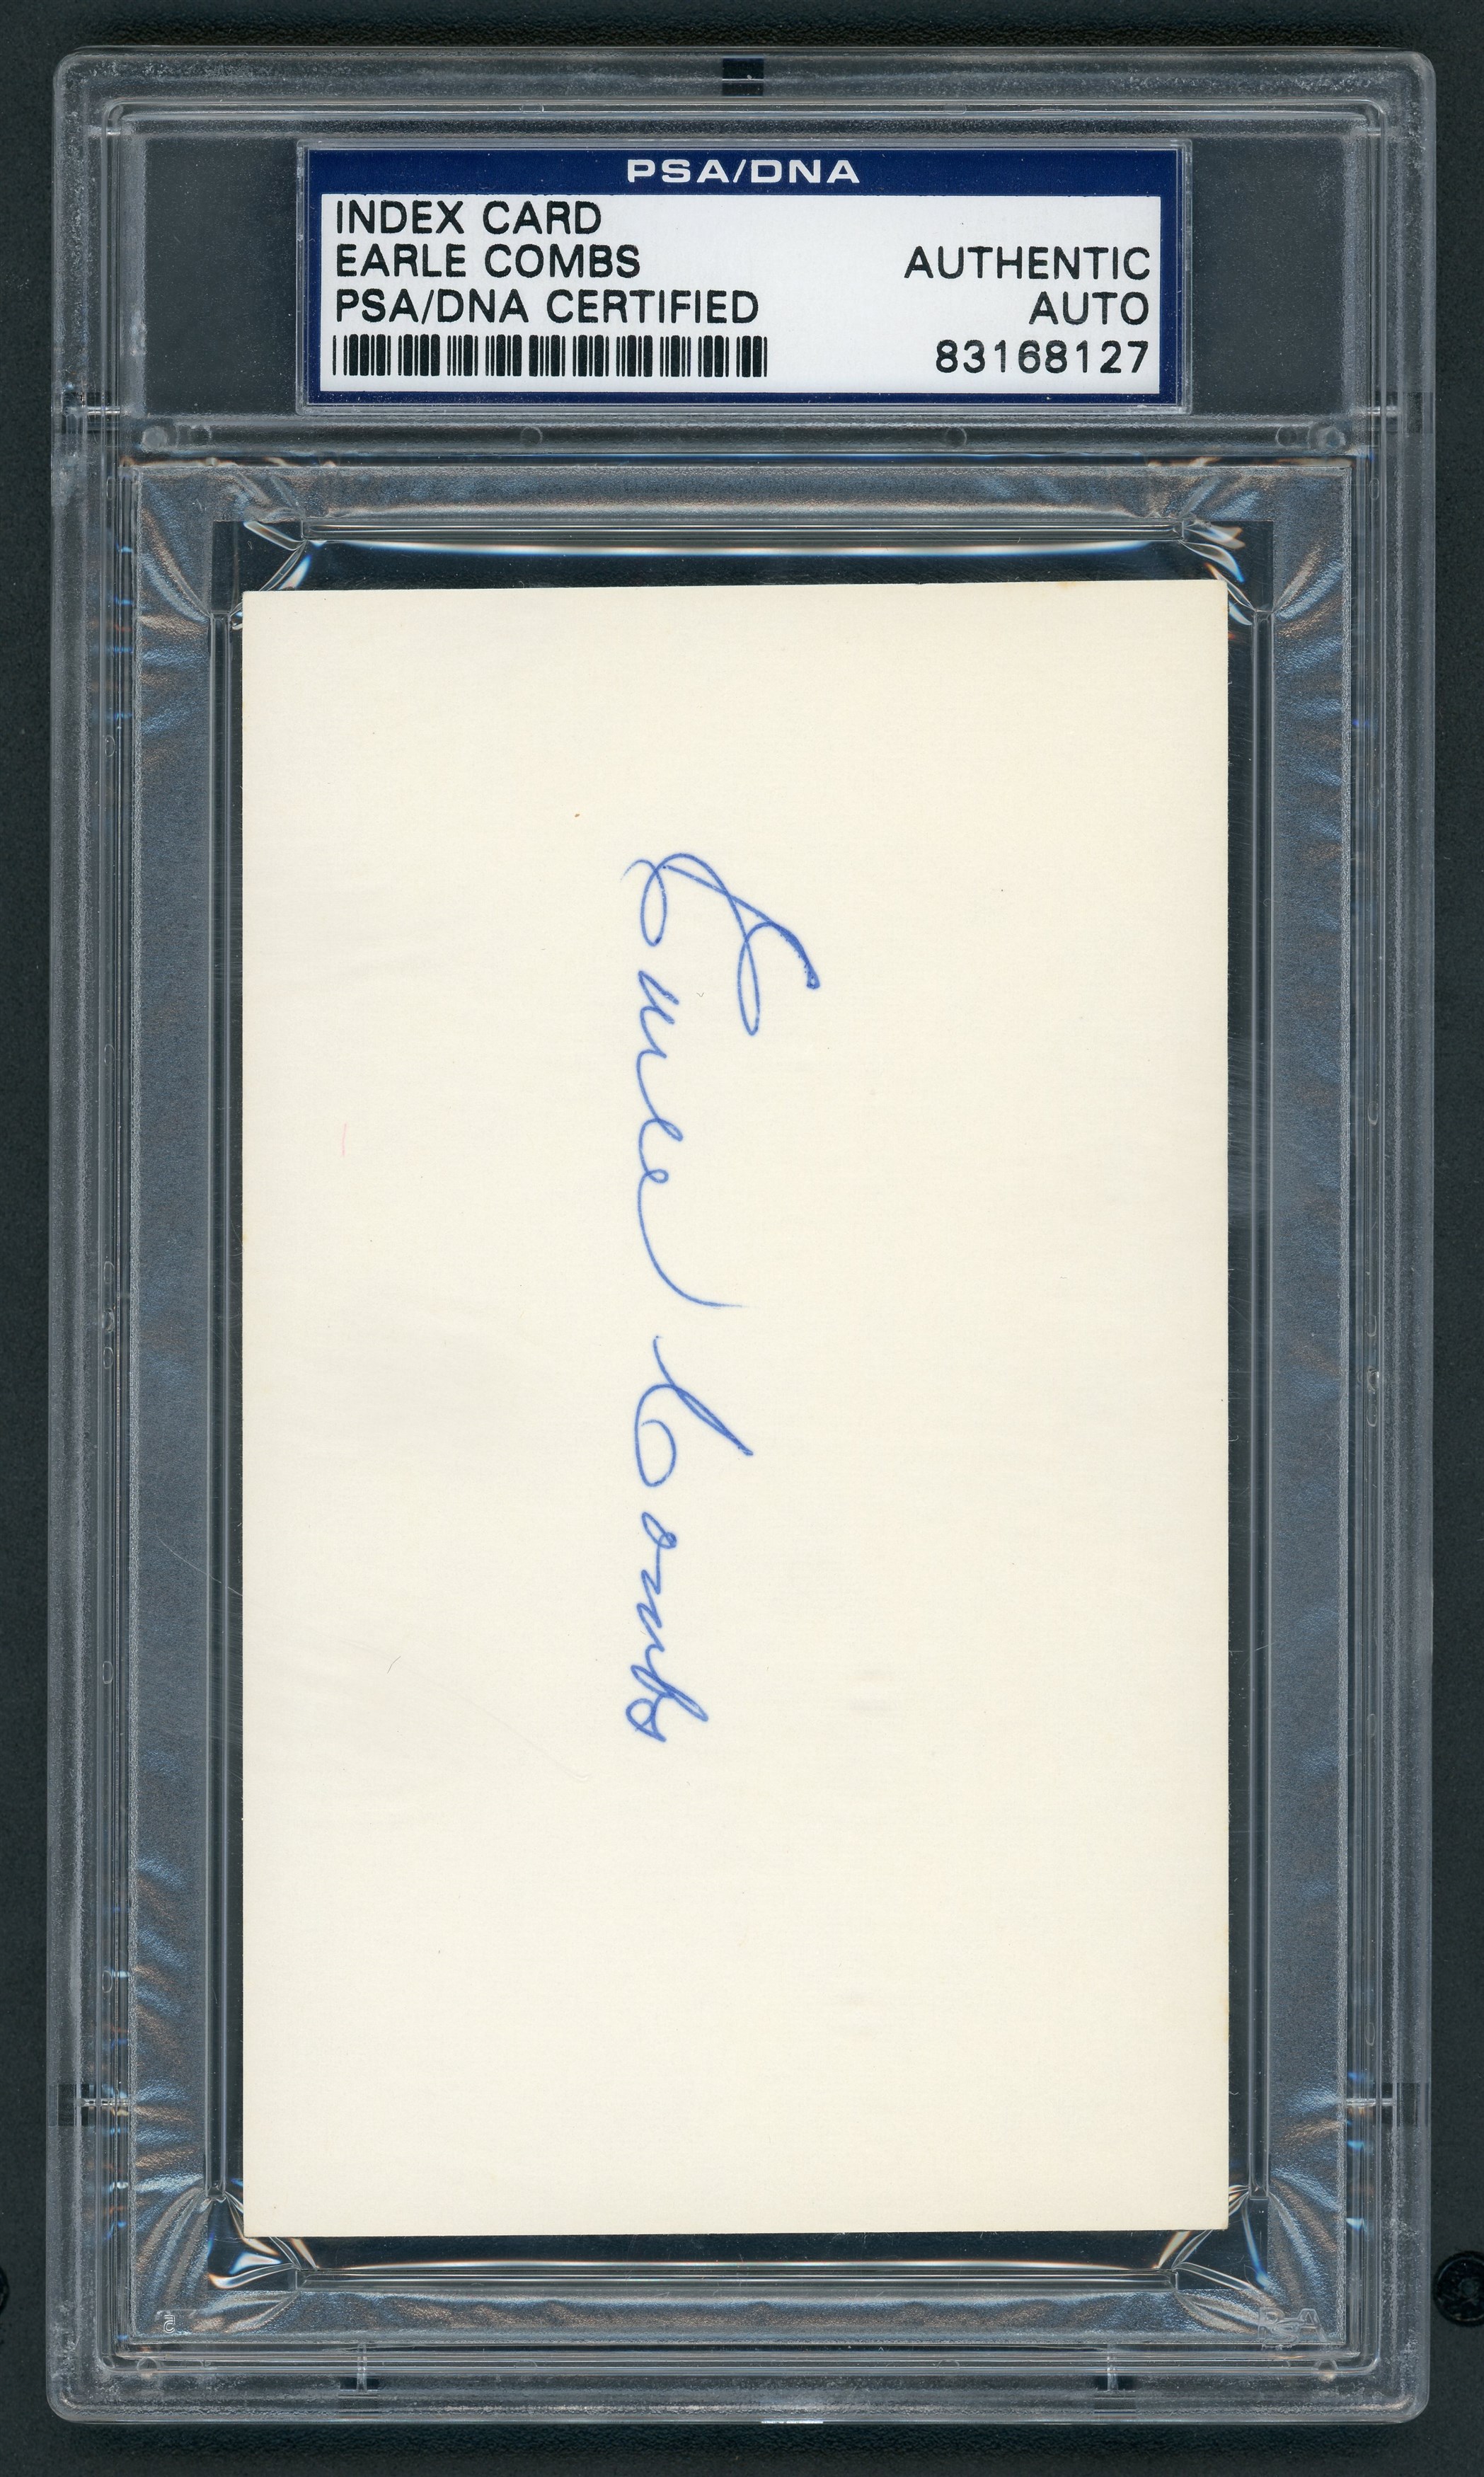 Baseball Autographs - Perfect Earle Combs Signed Index Card (PSA/DNA)